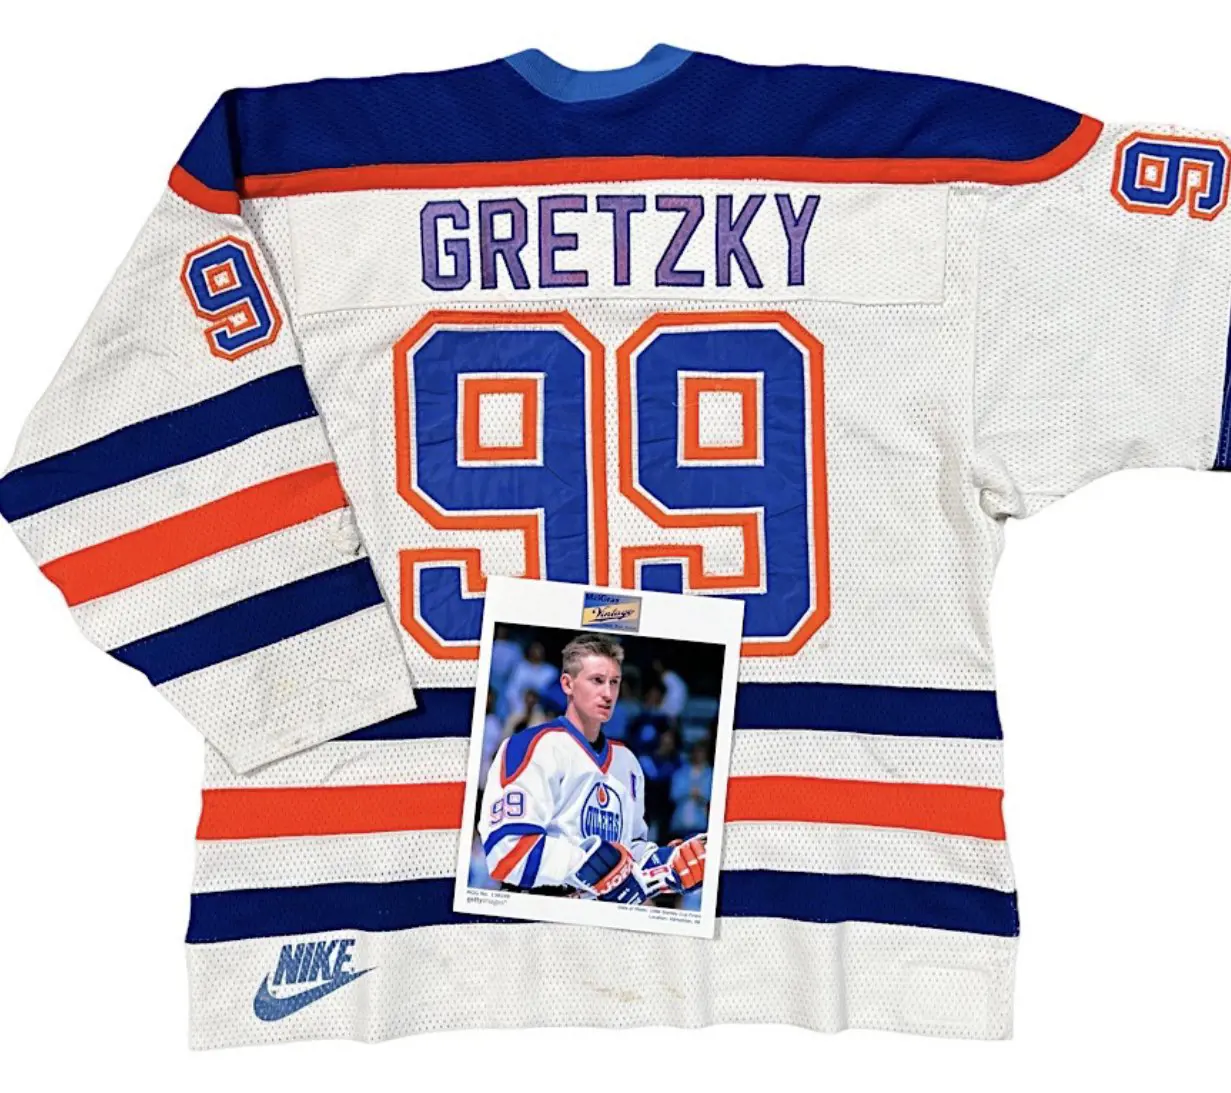 Iconic jersey of Gretzky from the 1988 Stanley Cup was sold for $1,452,000